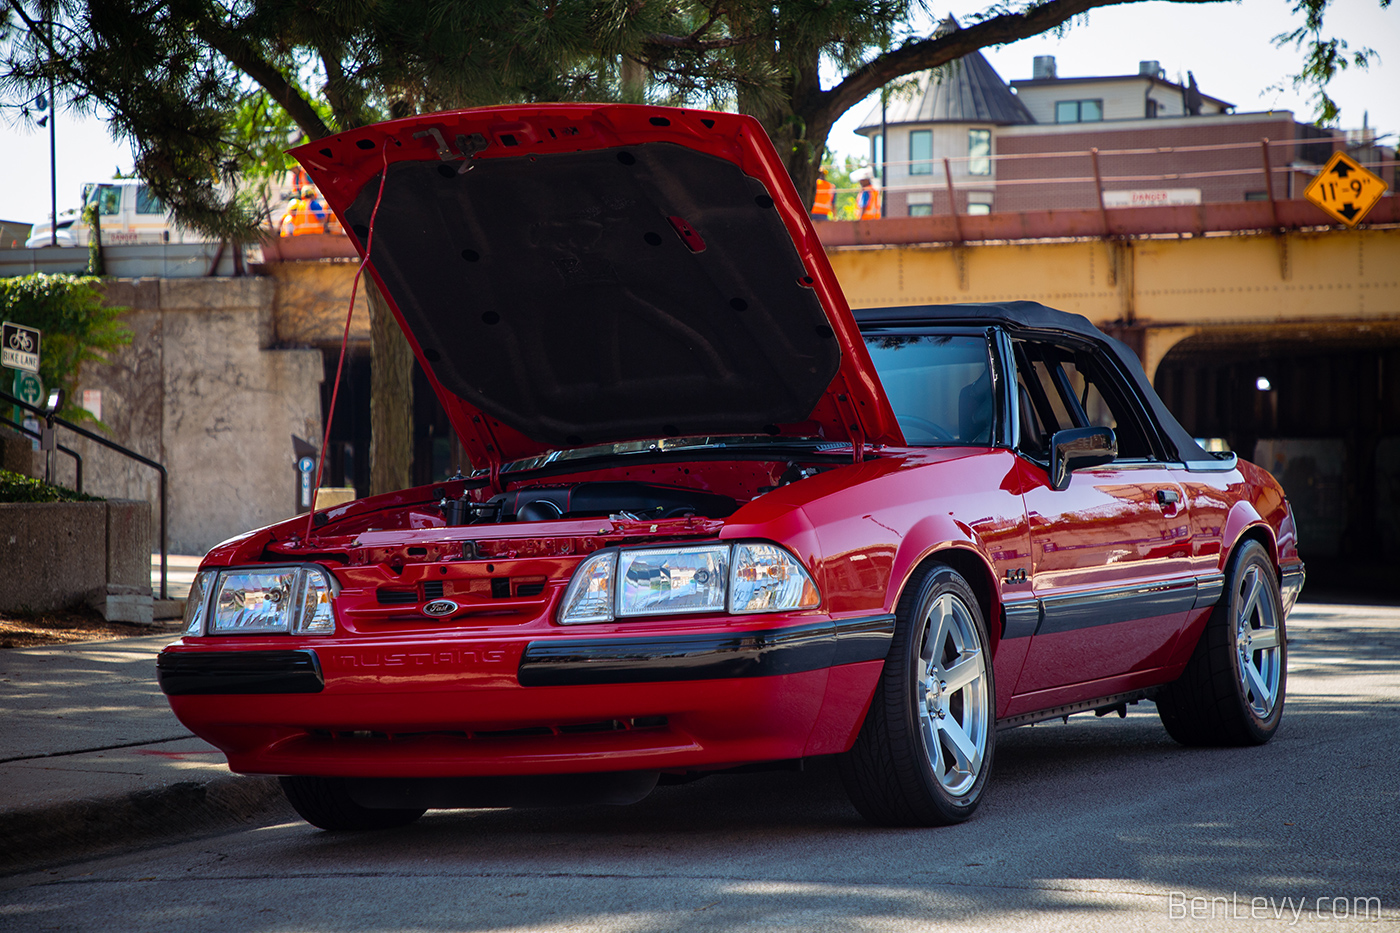 Red Fox-body Ford Mustang Convertible